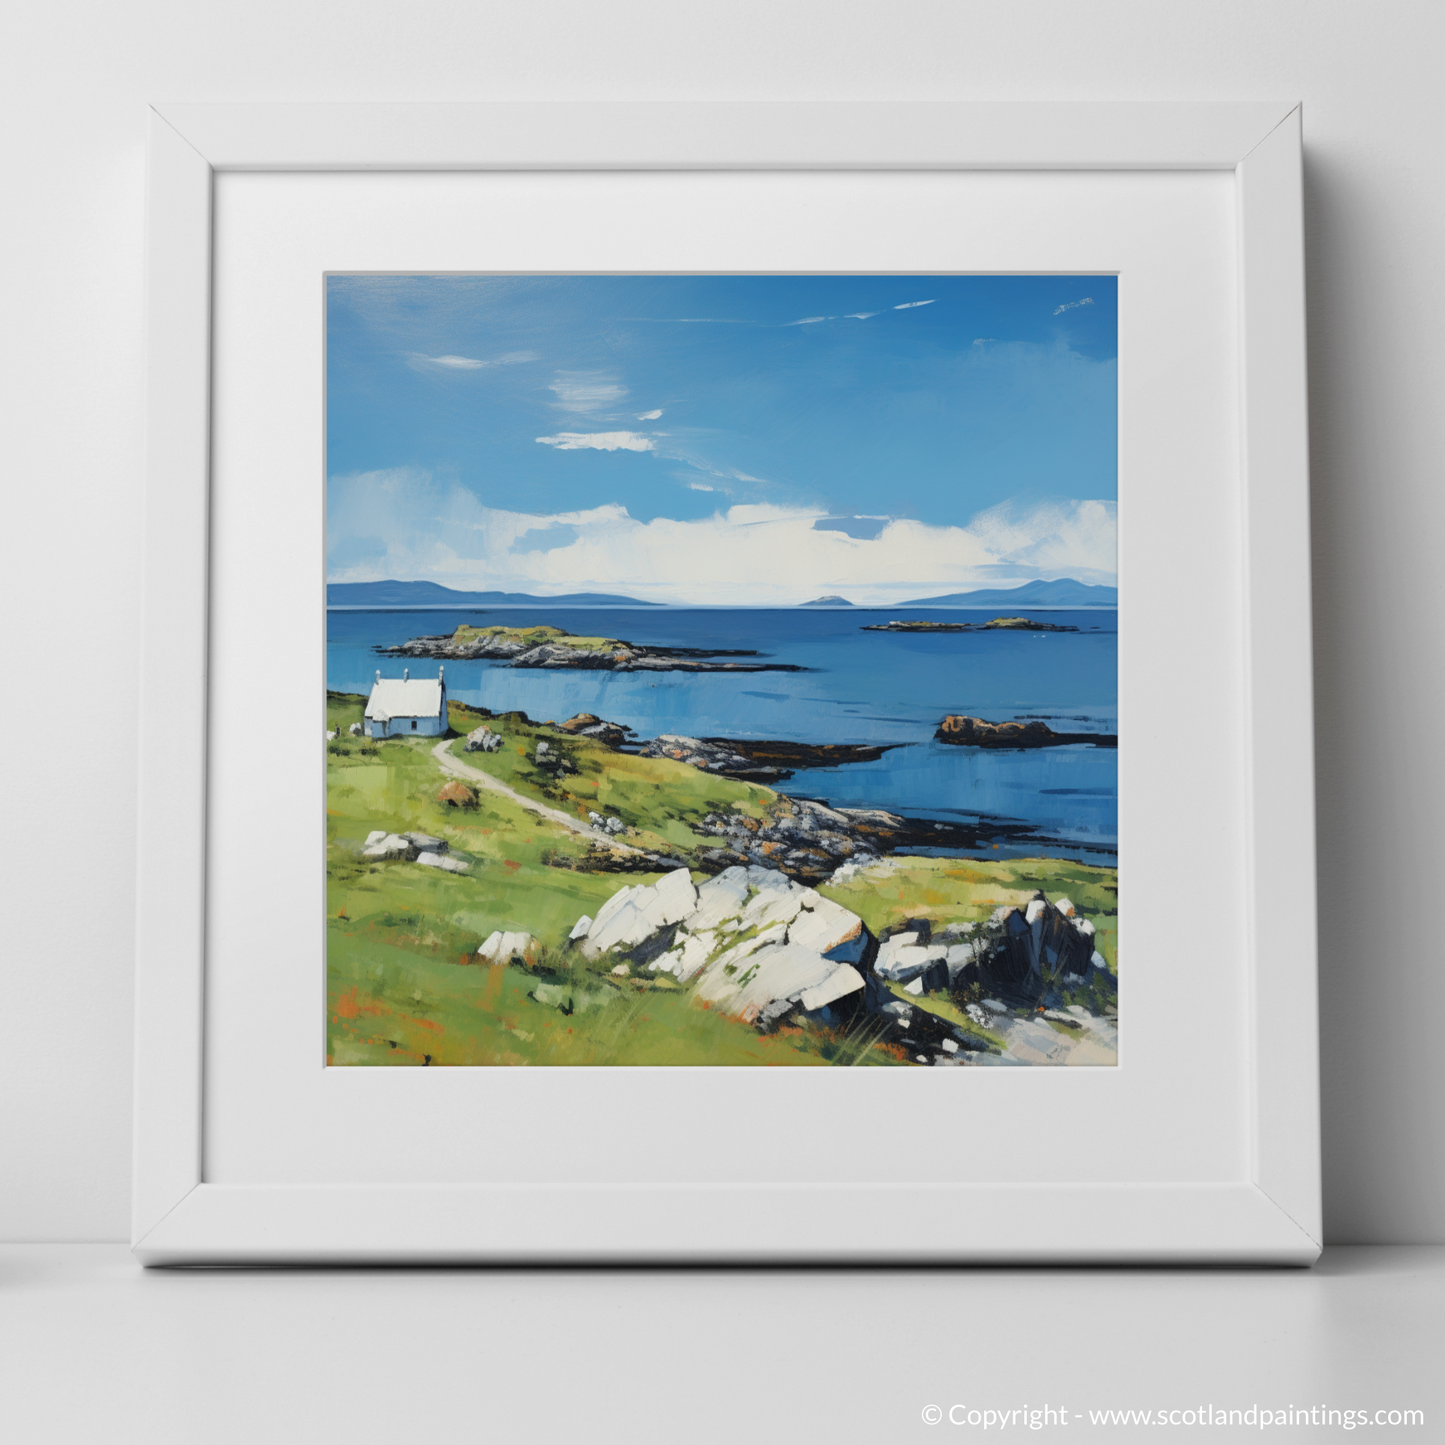 Art Print of Isle of Scalpay, Outer Hebrides in summer with a white frame